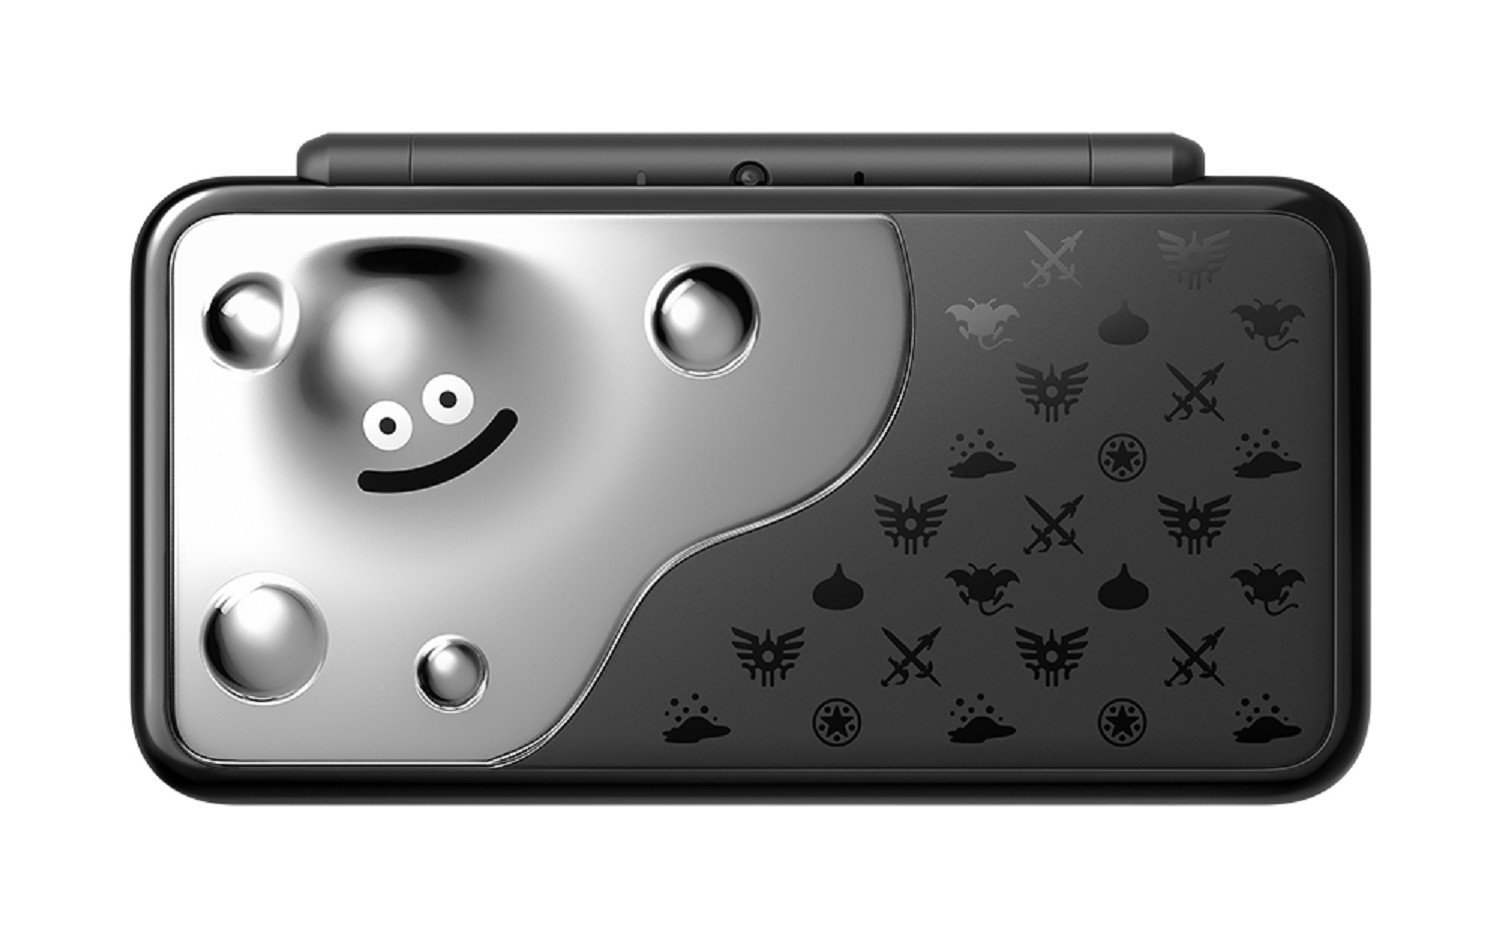 Dragon Quest XI New Nintendo 2DS LL Is Back For Pre-order